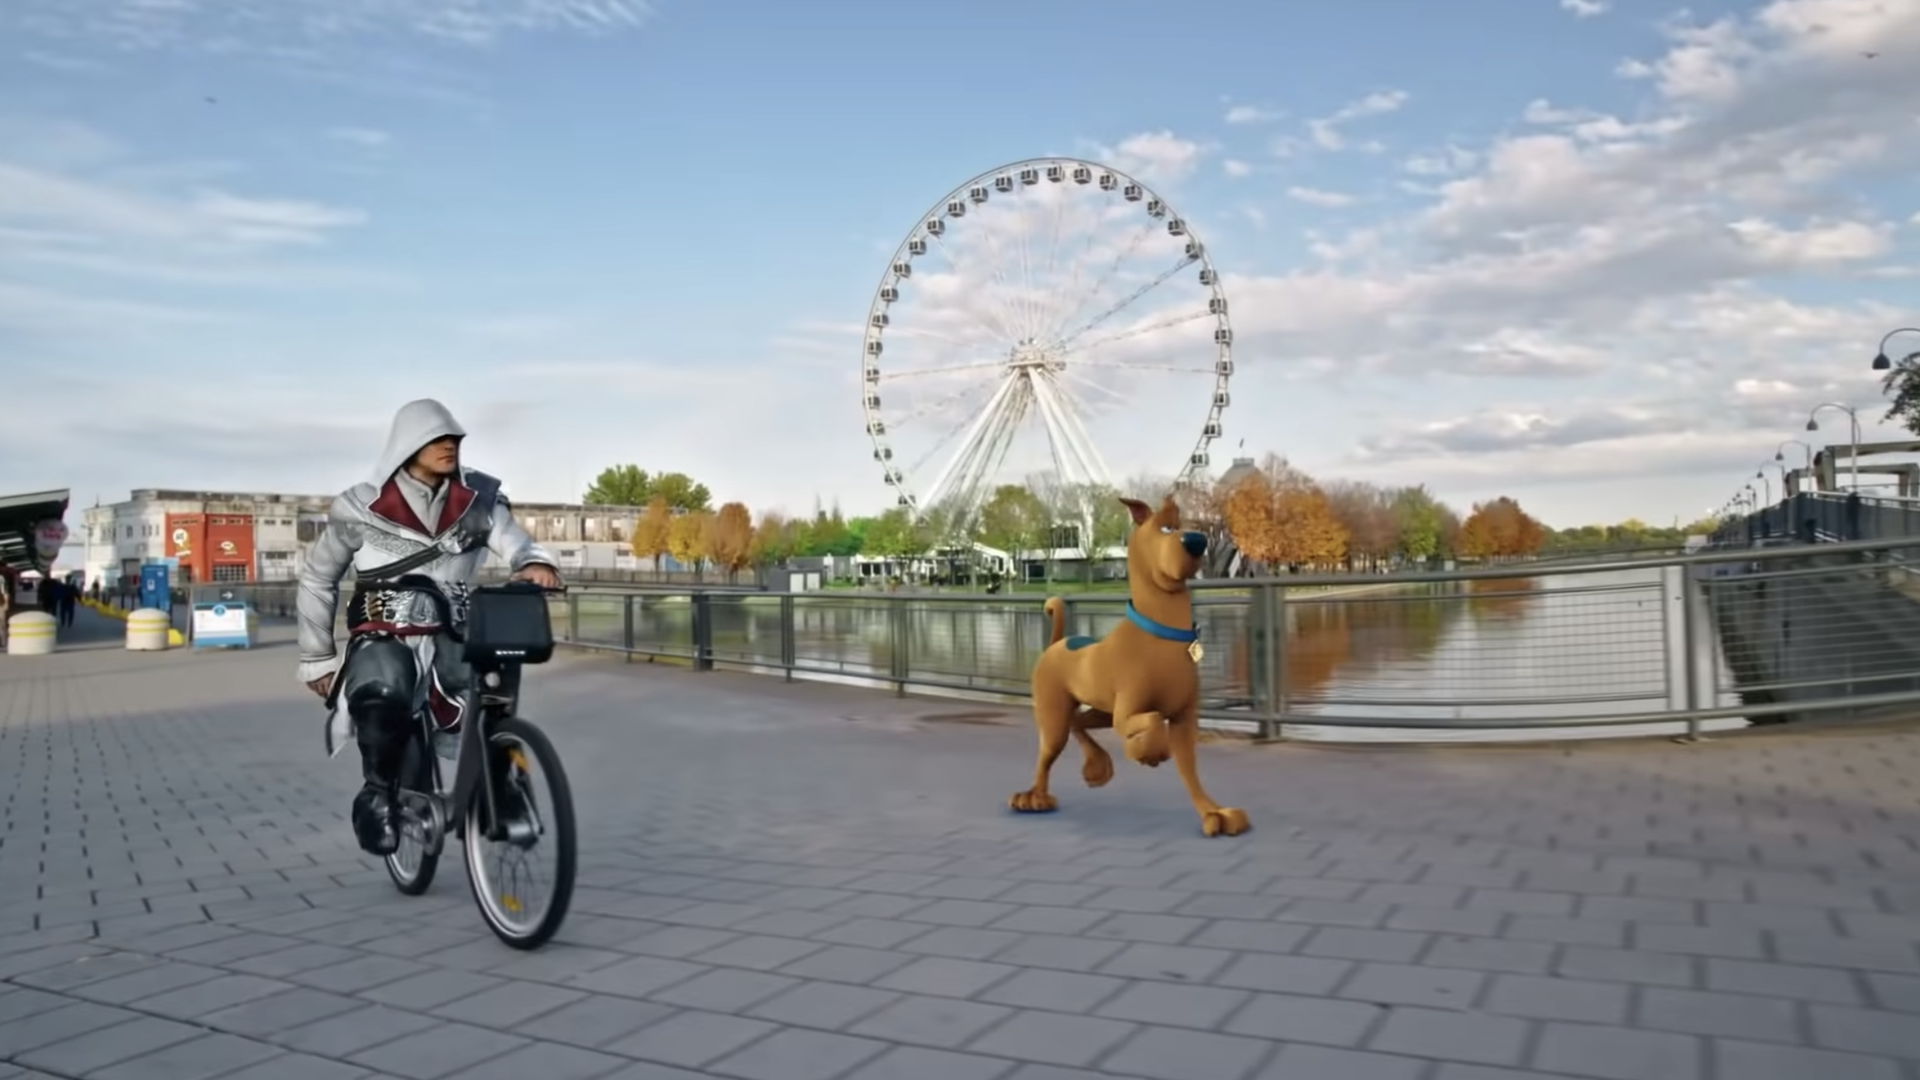 Screenshot of a video of a costumed man on  a bicycle and a brown cartoon dog, with a ferris wheel in the background